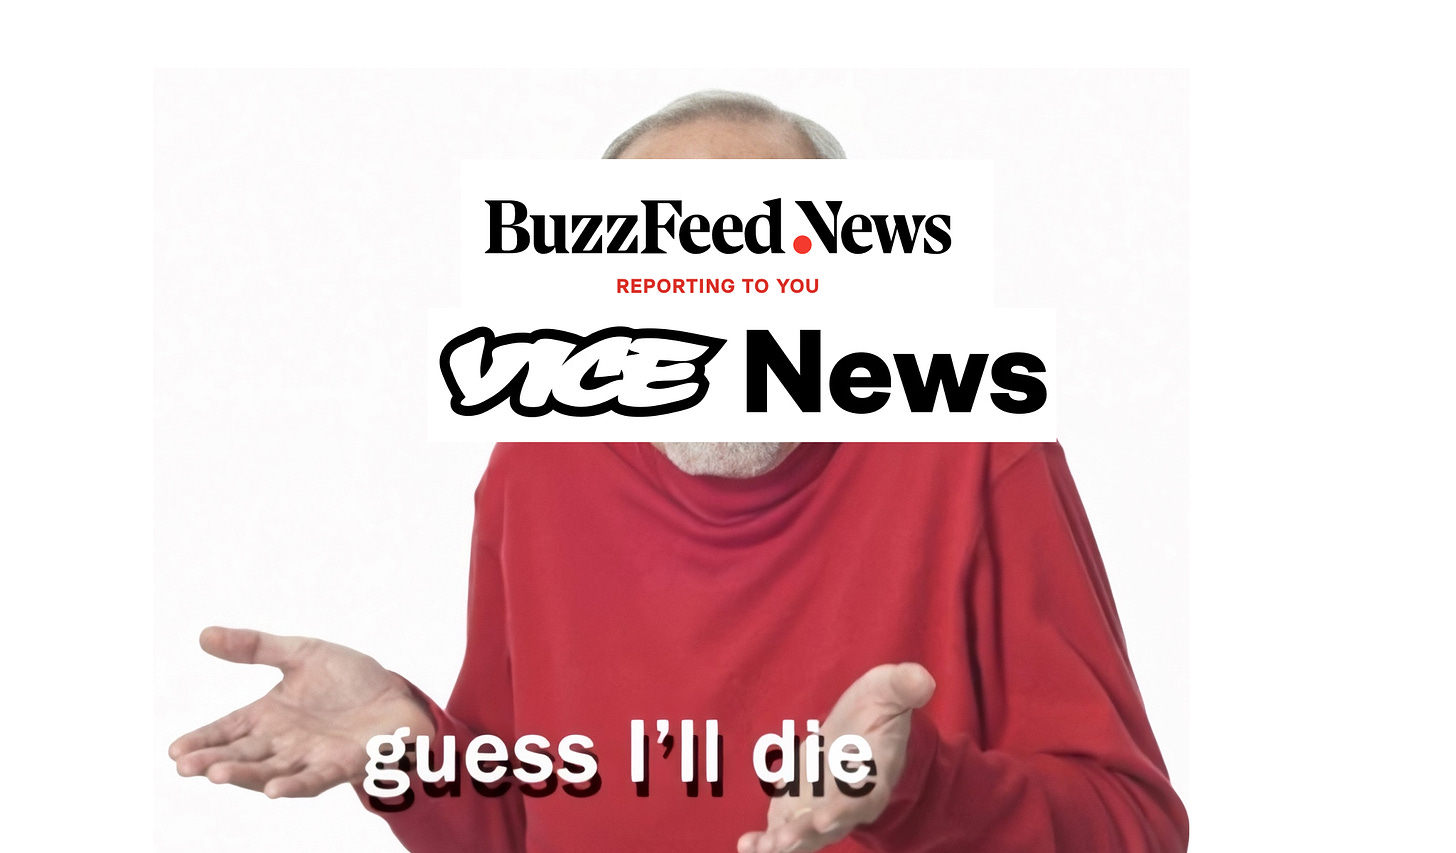 Old man shrugging meme, Buzzfeed News and Vice News are overlayed on his face and the caption reads "guess I'll die"